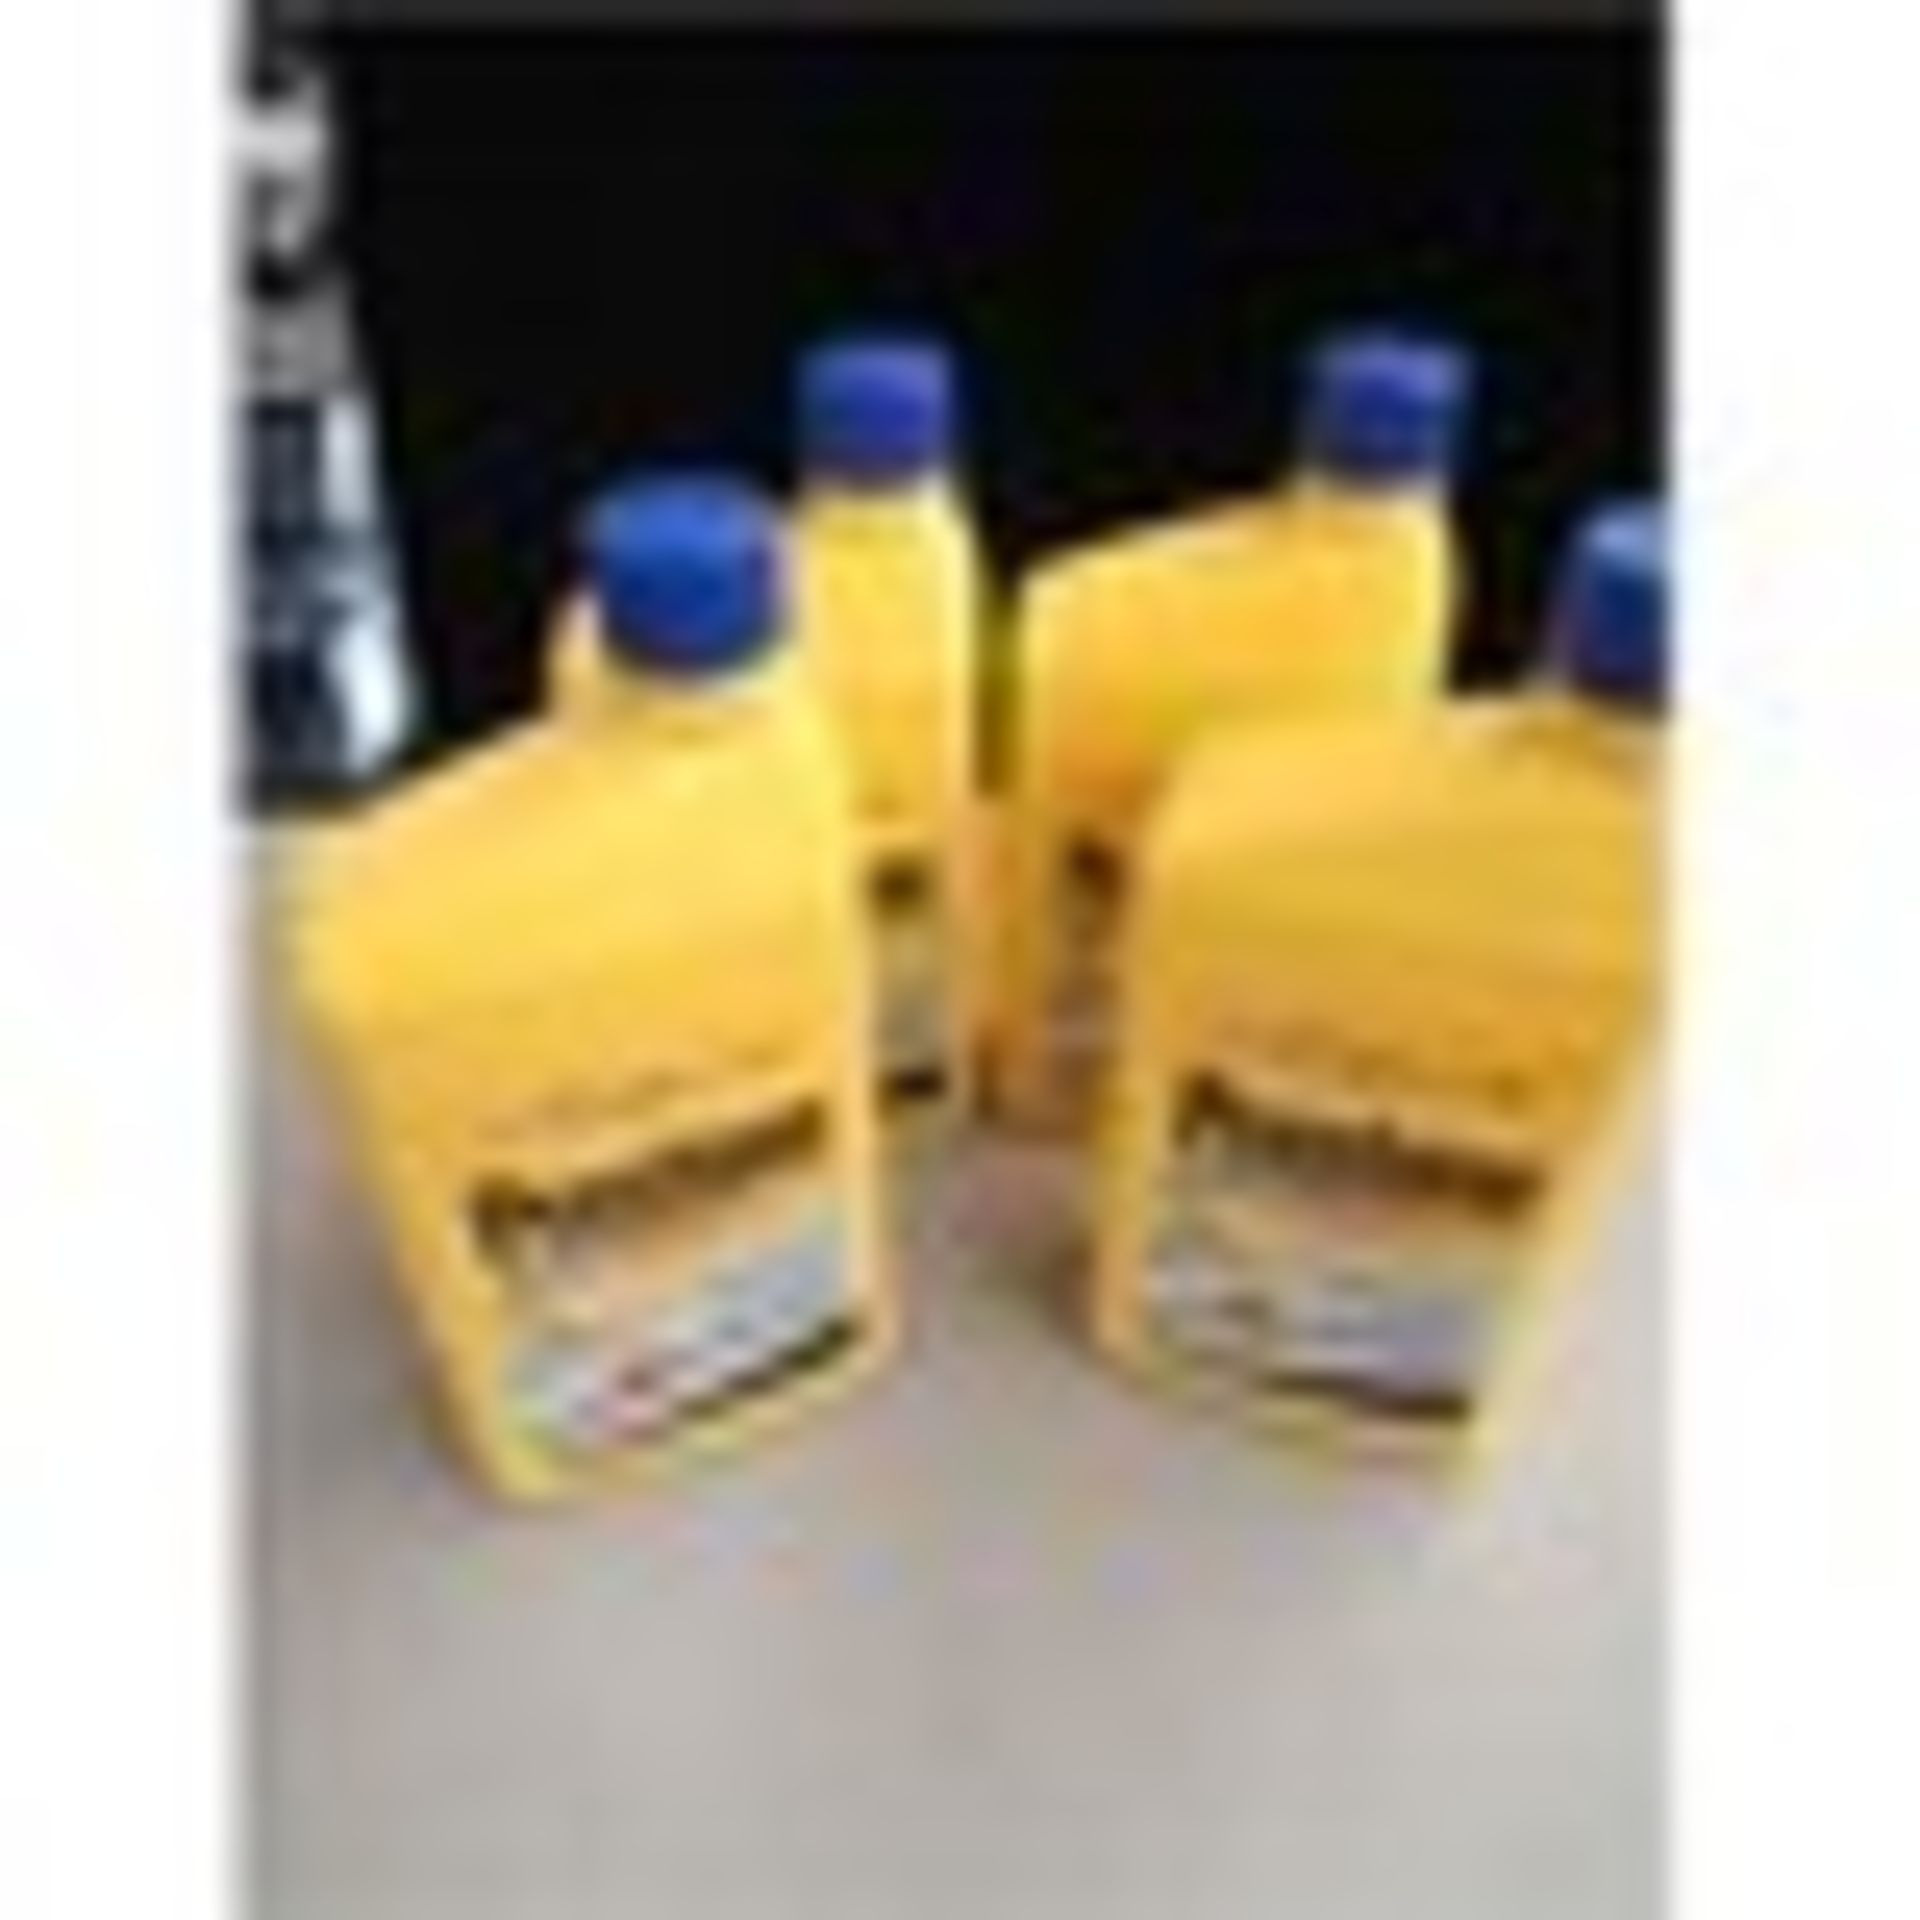 4 litres - brand new Prestone Anti Freeze / Coolant - rrp £4.99 a litre ( 4 bottles in lot )